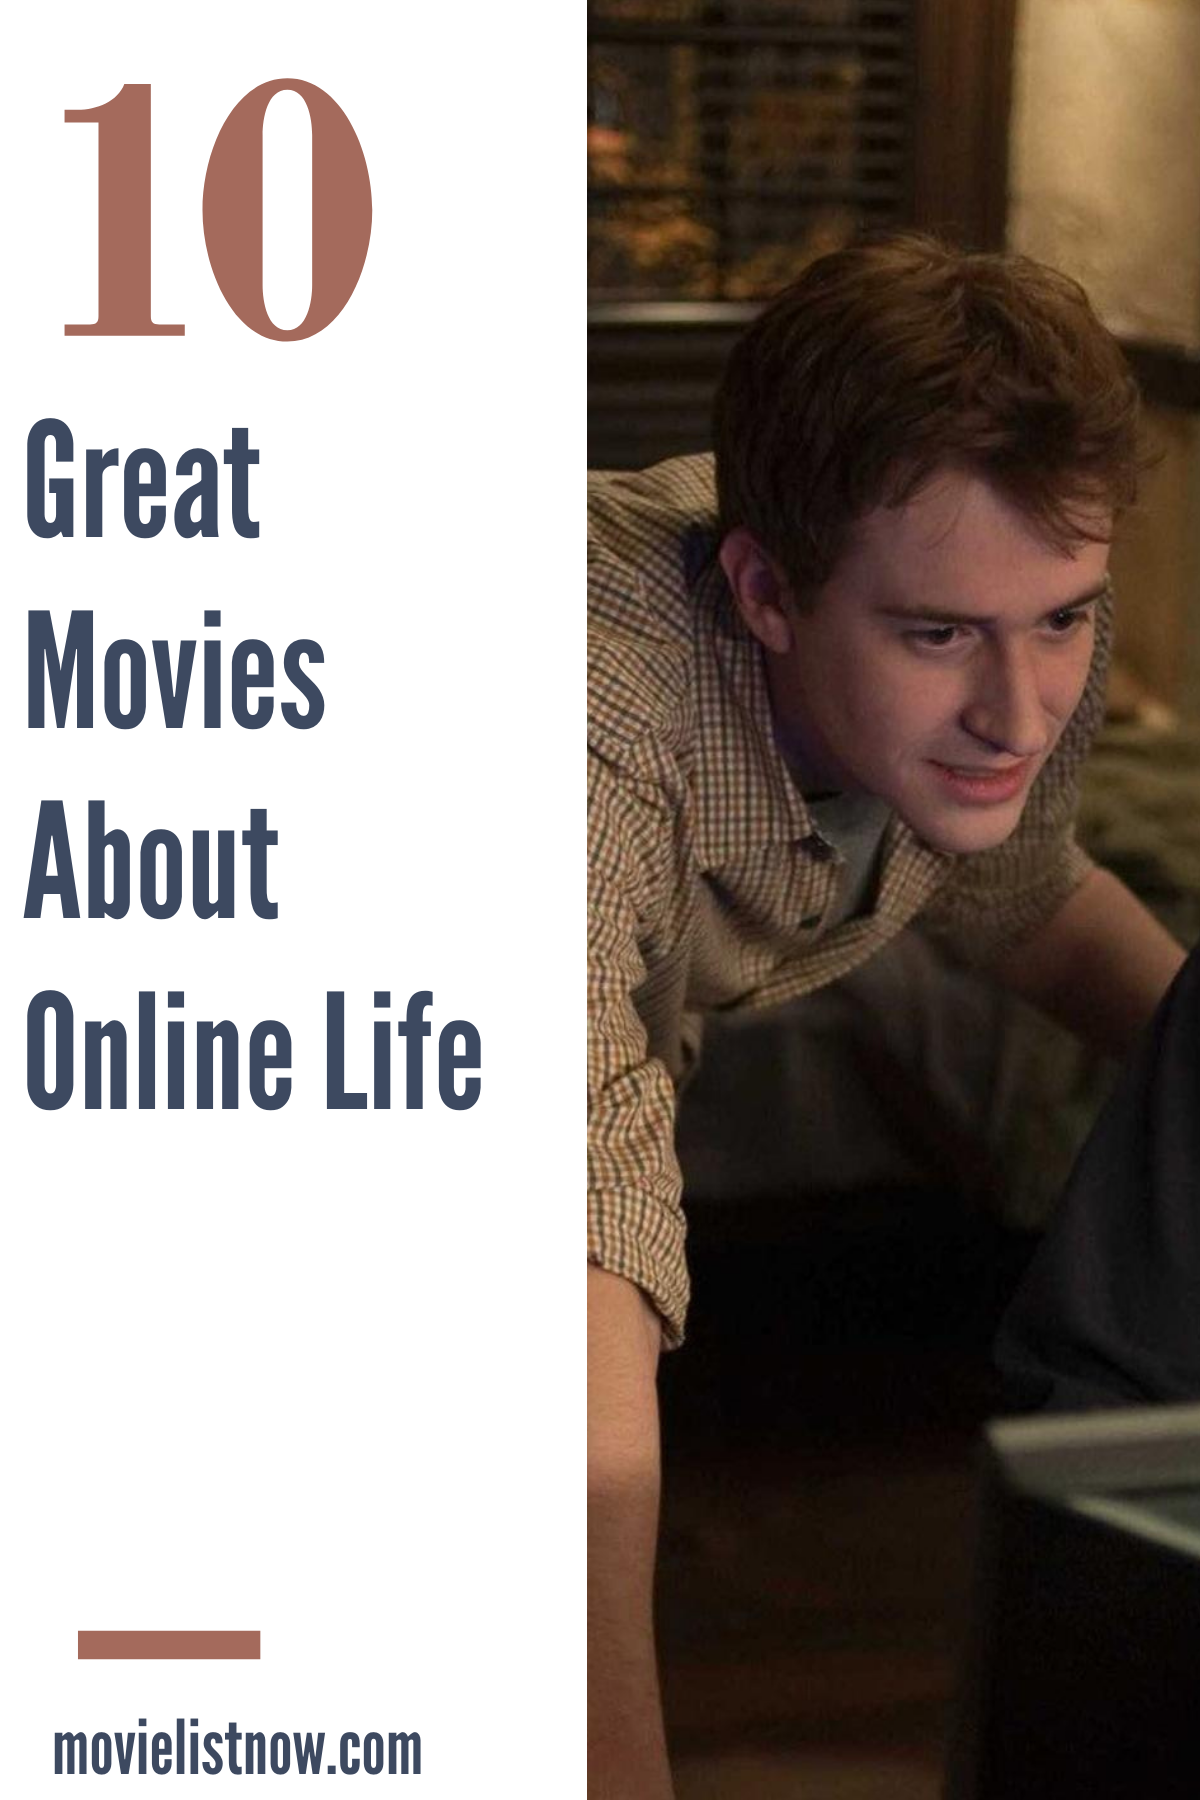 10 Great Movies About Online Life - Page 2 of 5 - Movie List Now